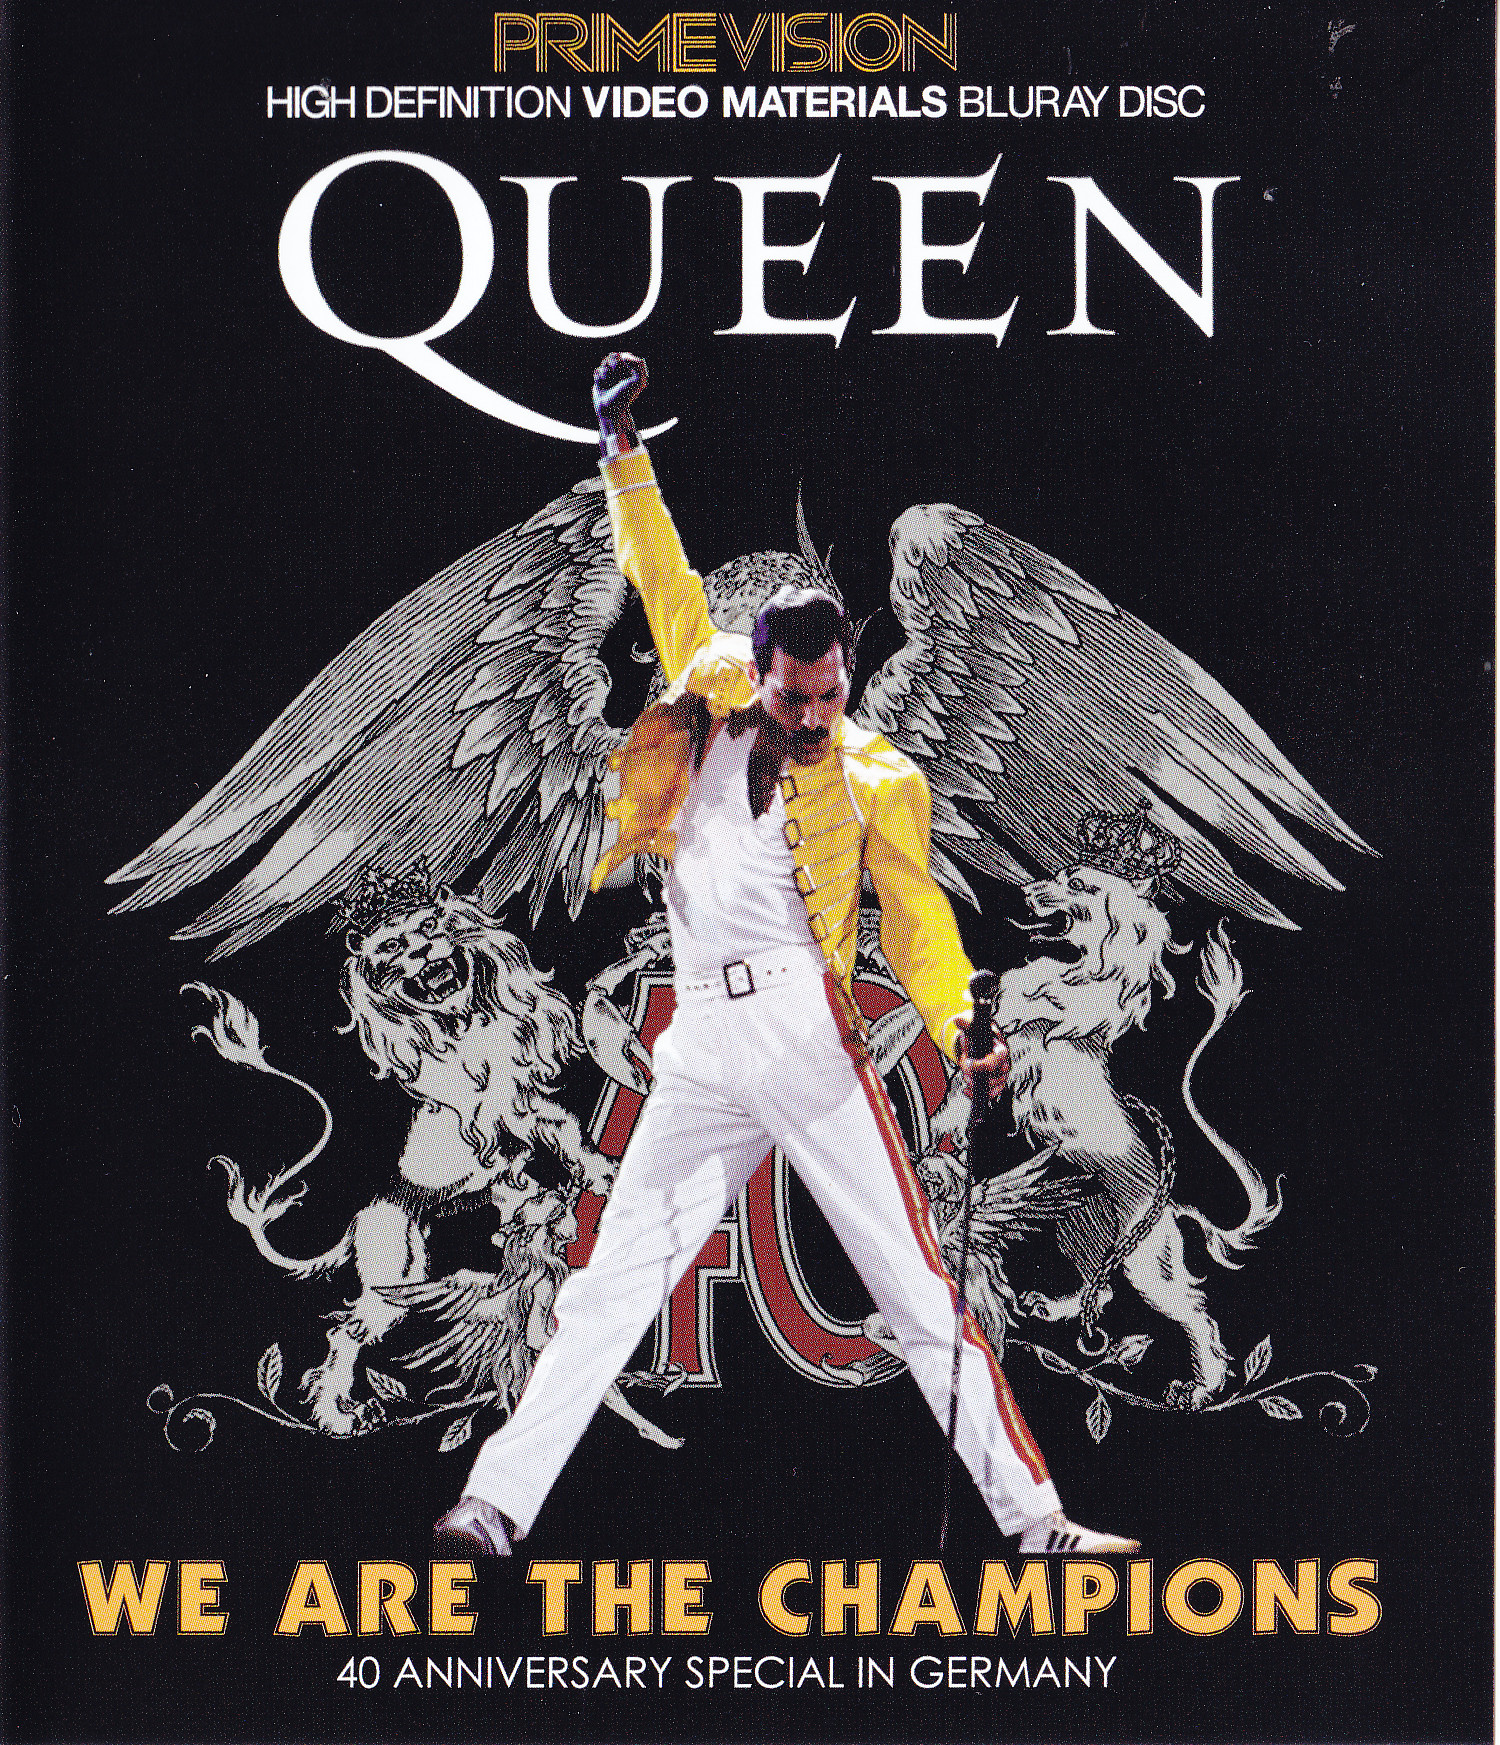 We Are The Champions' by Queen: The making of the ultimate stadium